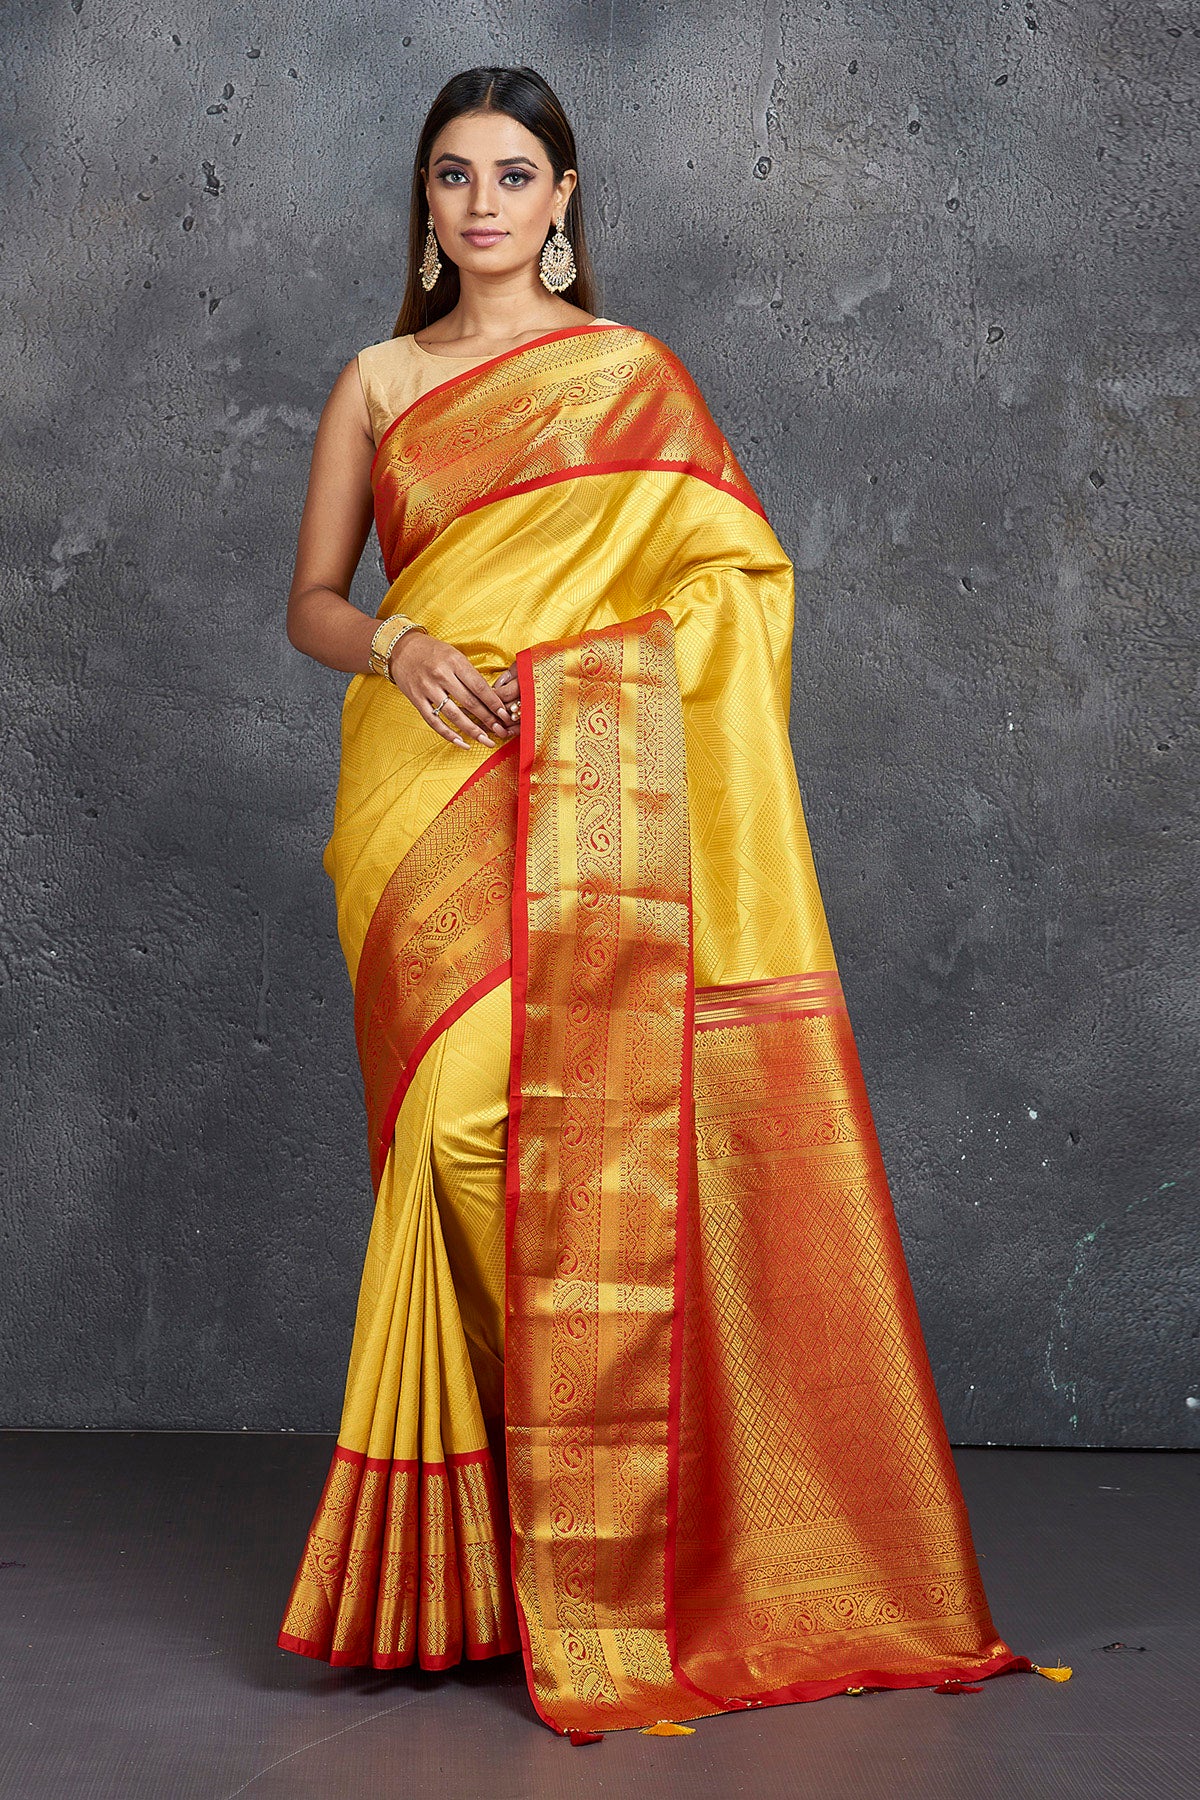 12 Authentic Silk Sarees From Different States Of India - South India Trends